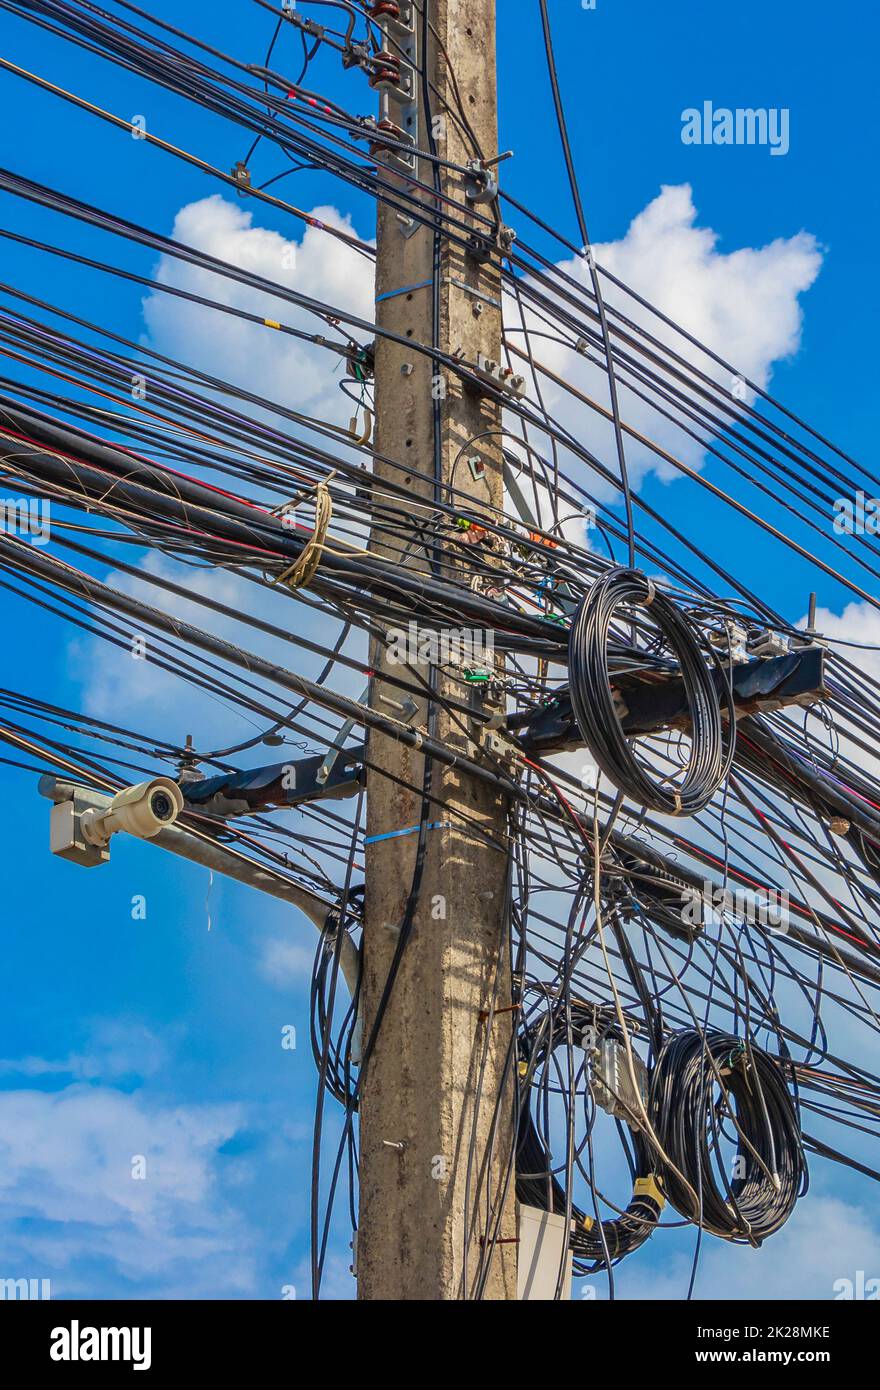 Absolute cable chaos on Thai power pole Thailand blue sky. Stock Photo